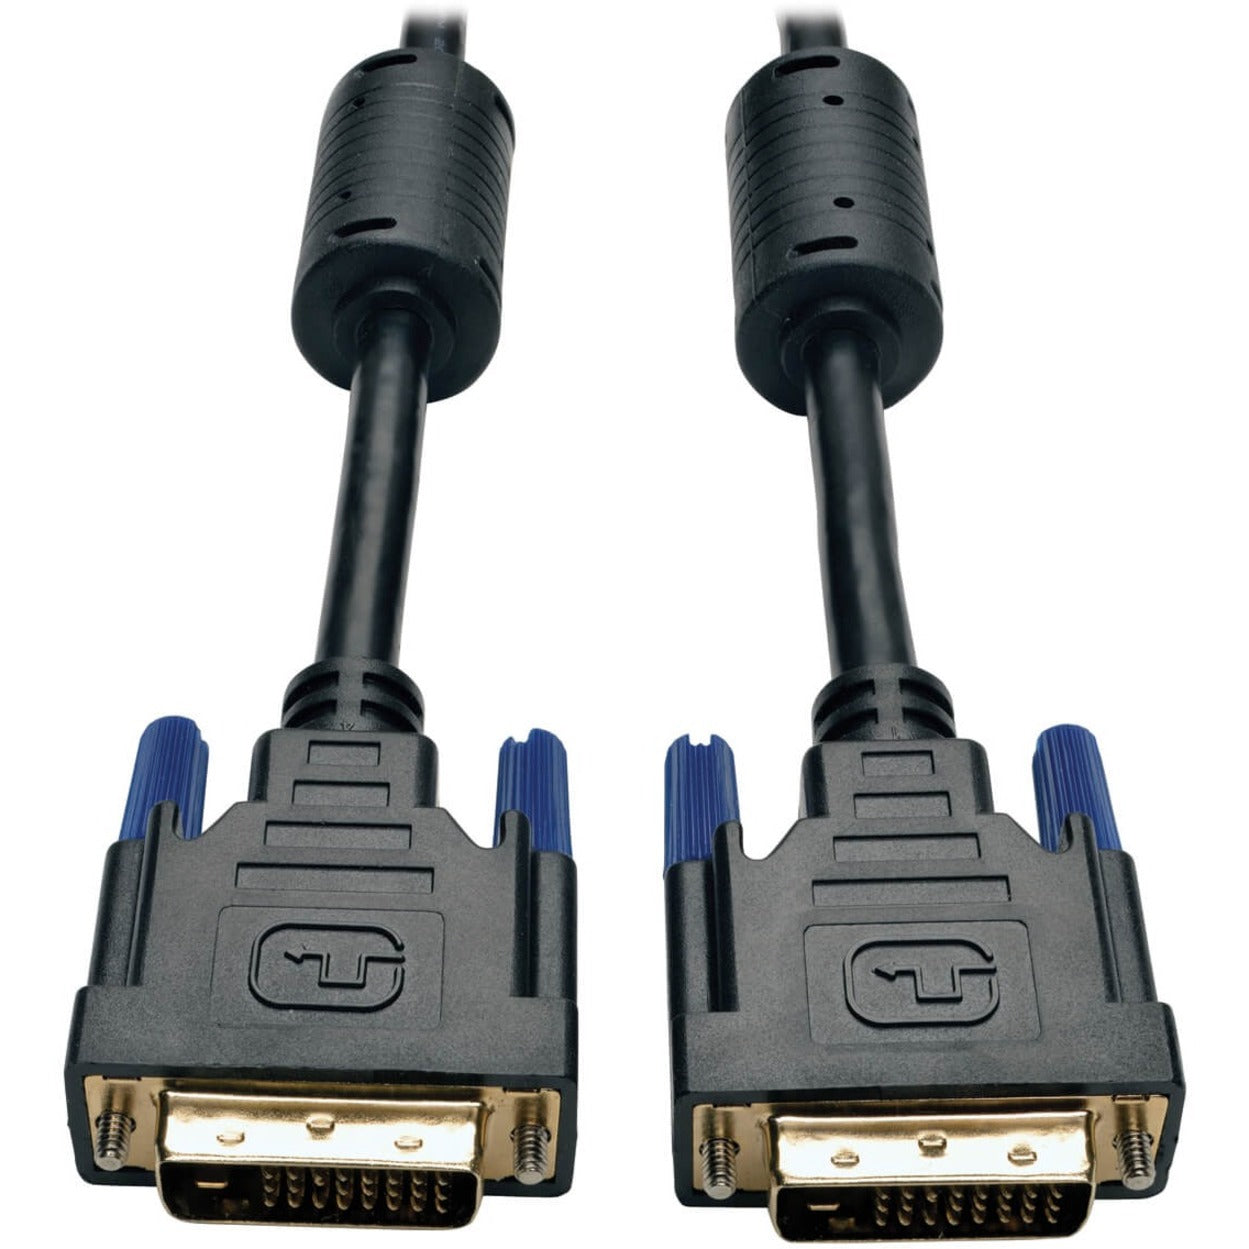 Tripp Lite P560-003 Video Cable, DVI-D Digital Video - Male to DVI-D Digital Video - Male, 3 ft, Molded, Copper Conductor, Shielded, Gold Plated